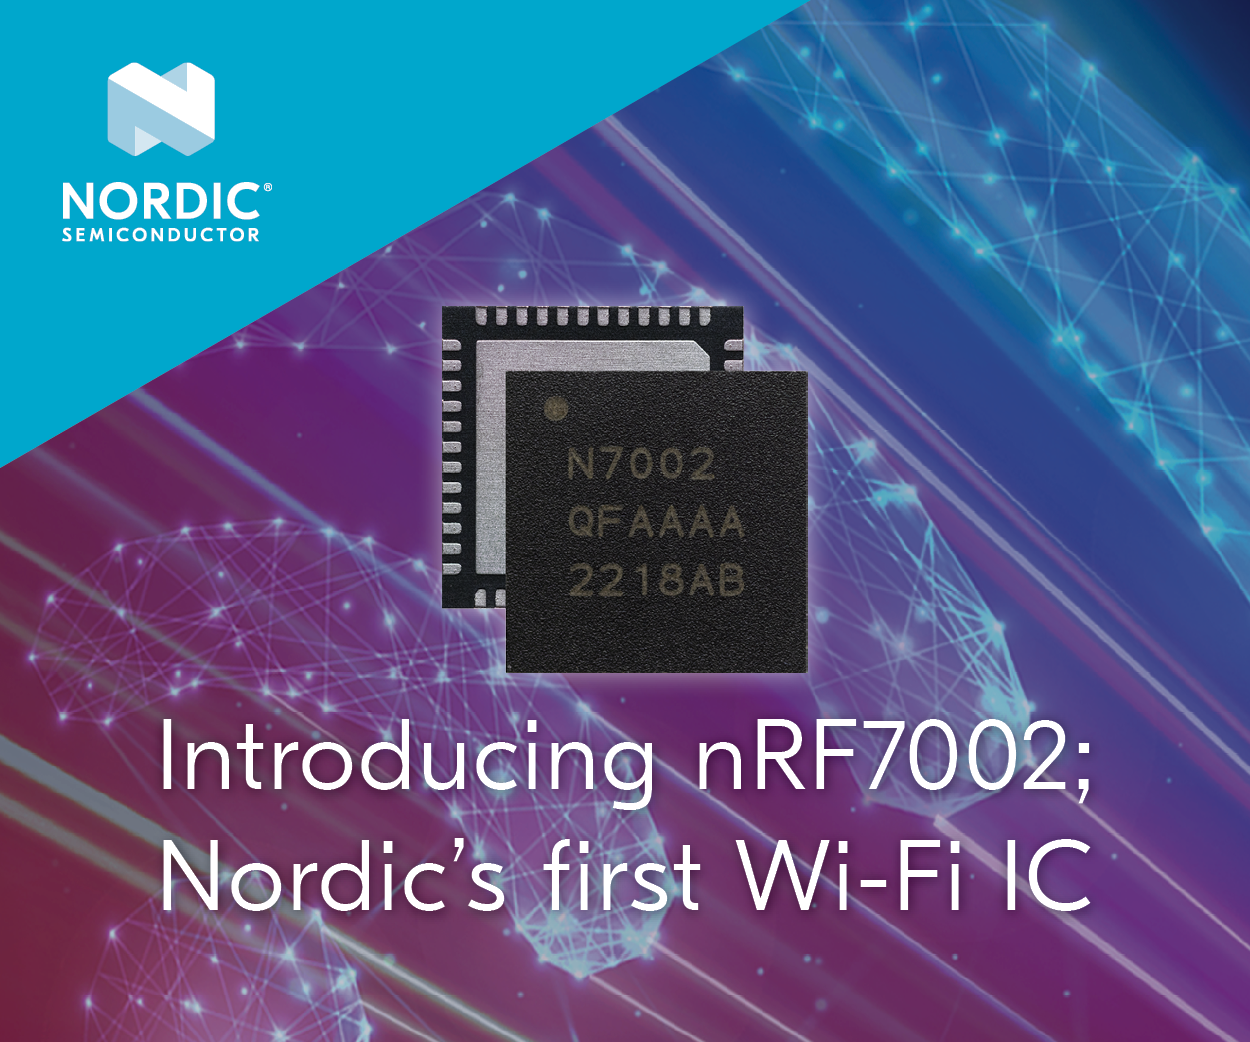 Nordic's First Wi-Fi Product – nRF7002 an Ultra-Low Power, Dual-Band Wi-Fi 6 Companion IC 